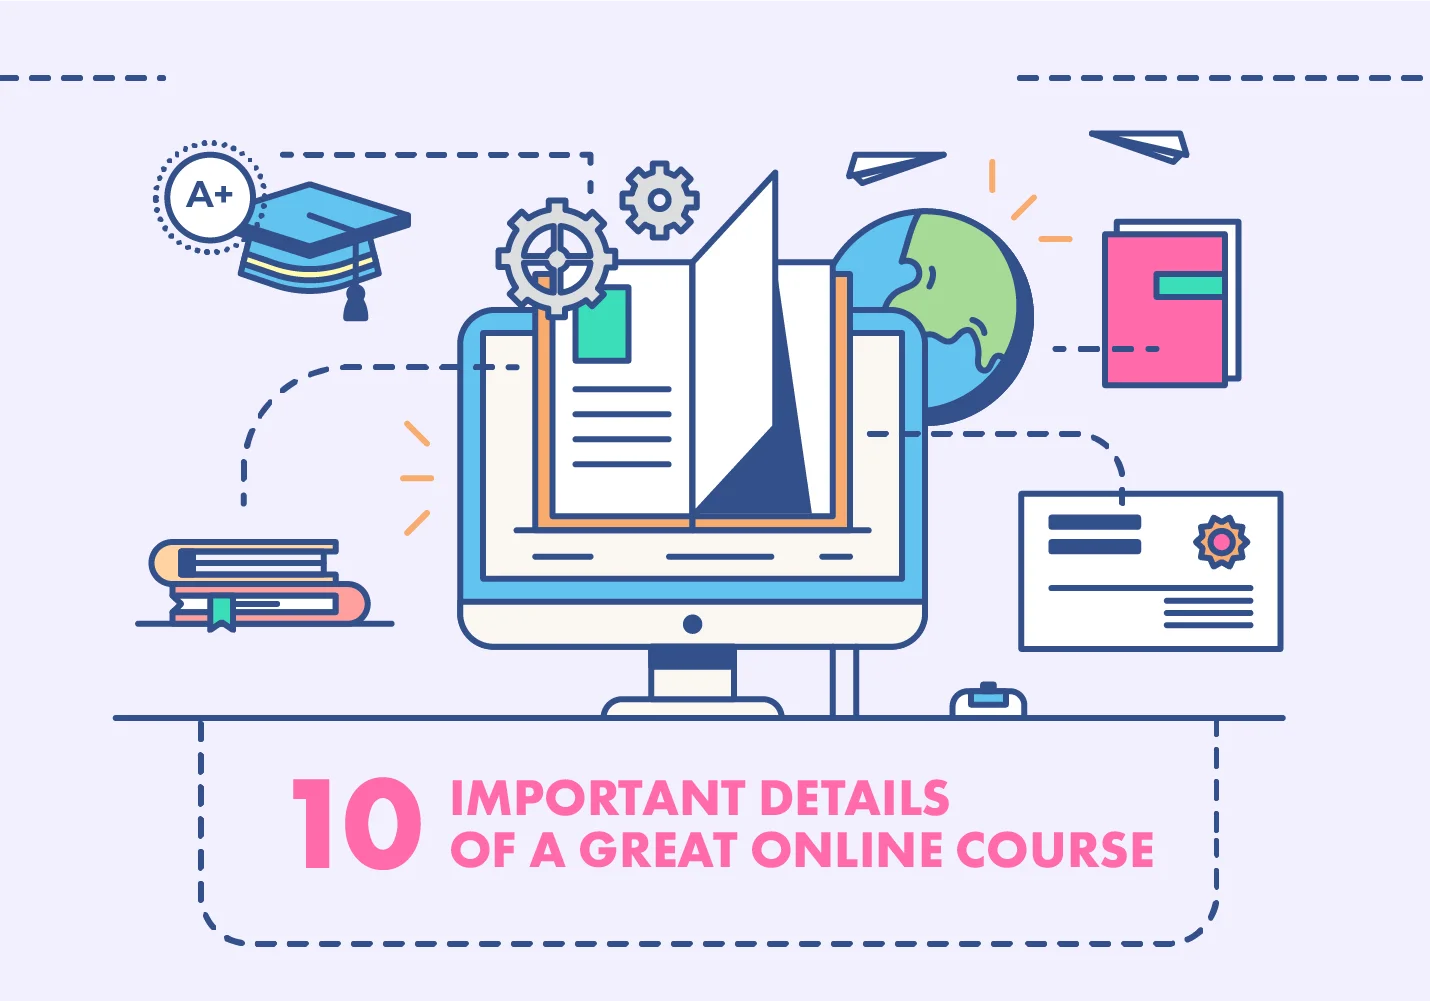 10 important details of a great online course